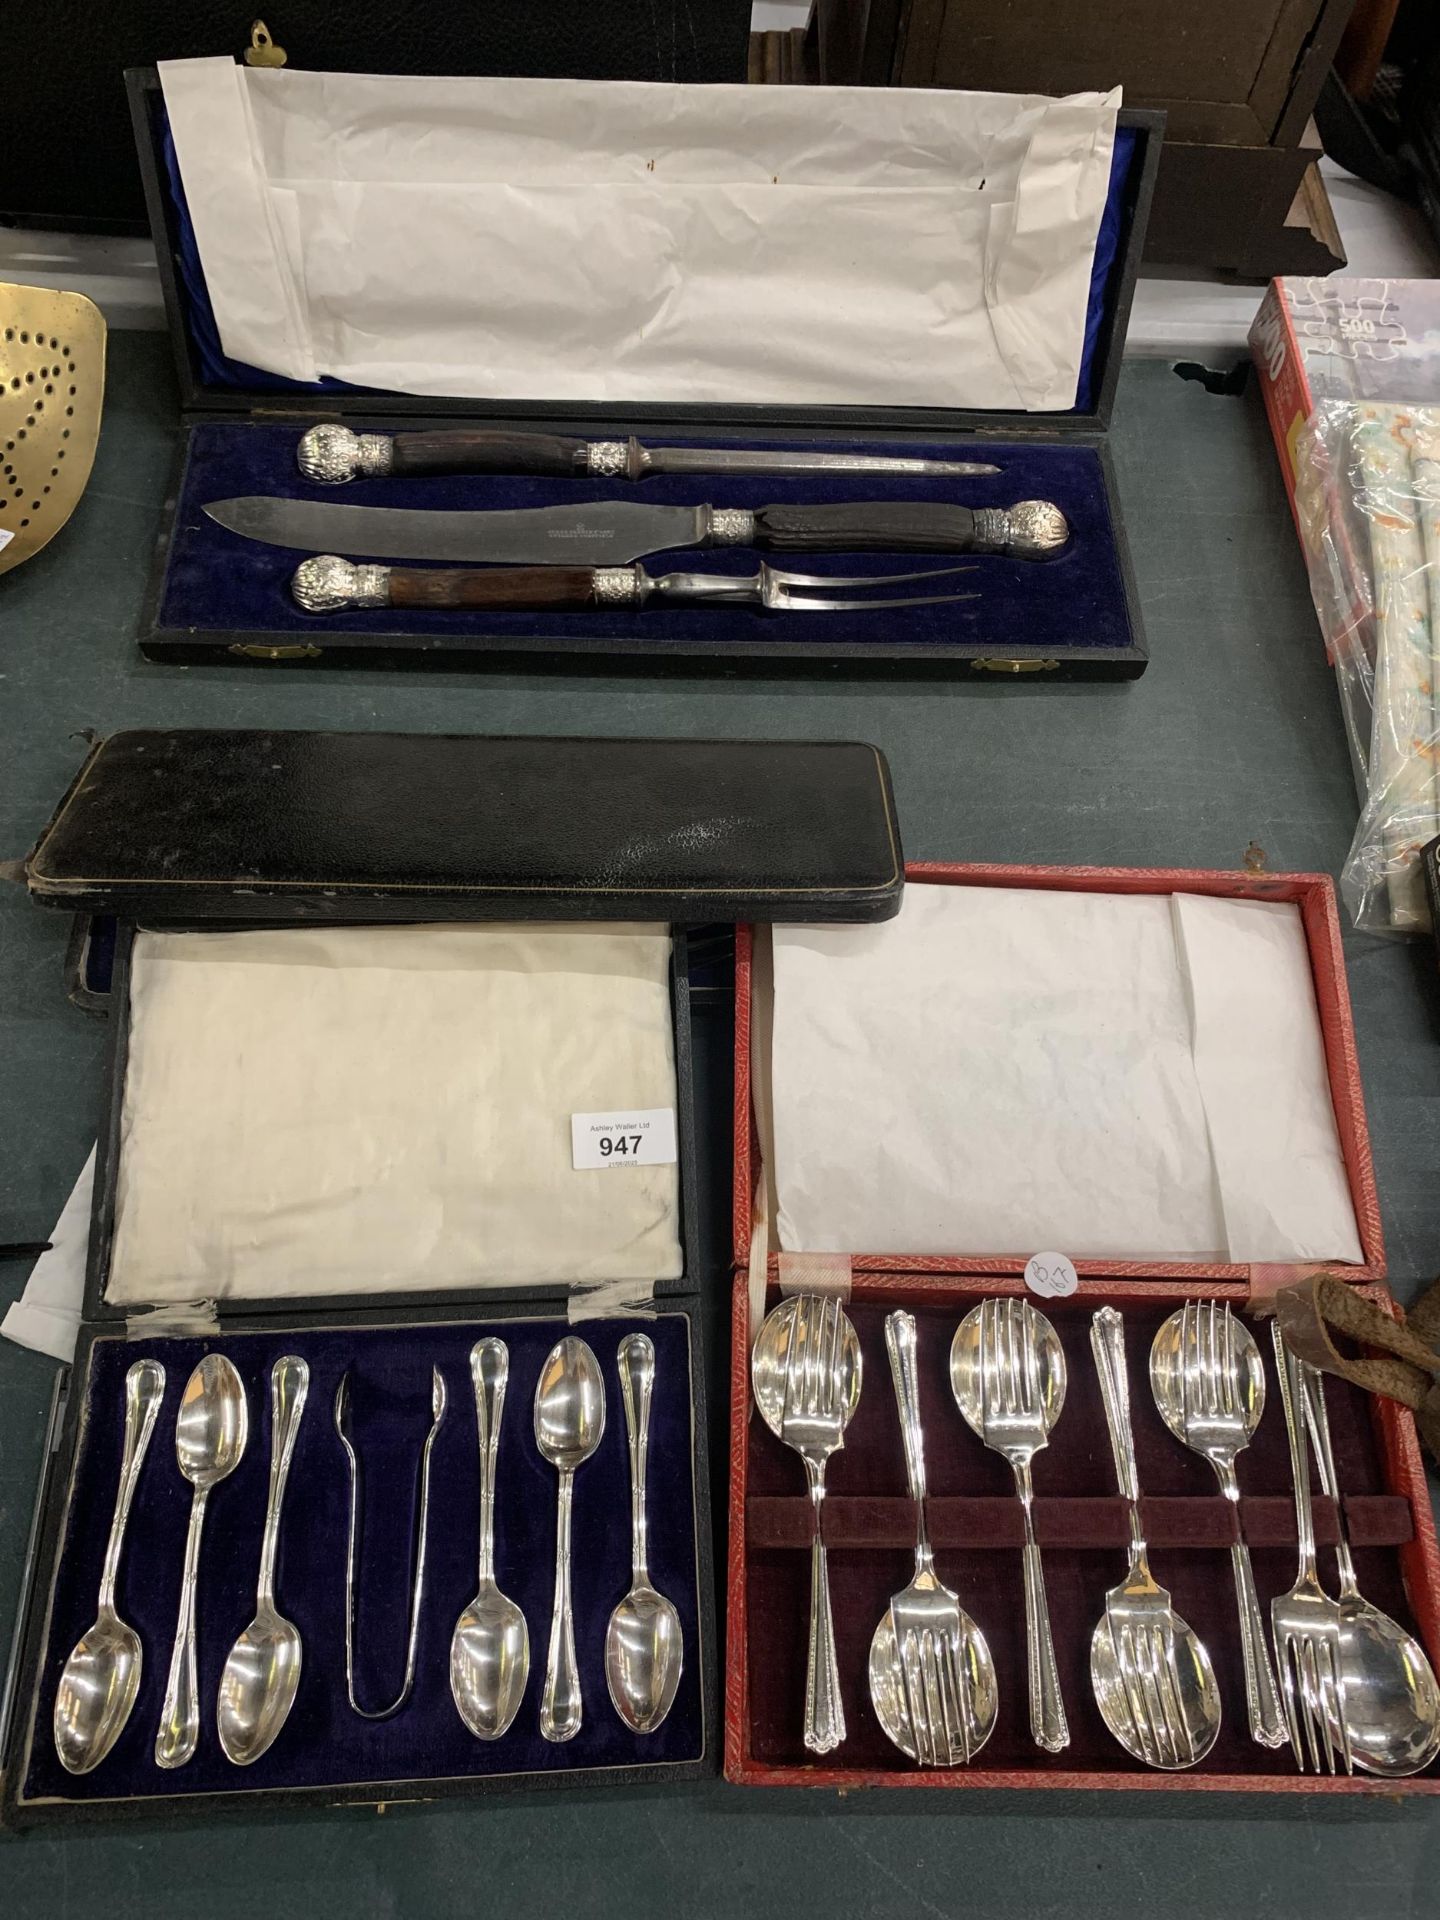 FOUR VINTAGE BOXES OF FLATWARE TO INCLUDE A CARVING SET, FISH SERVING SET, TEASPOONS WITH SUGAR